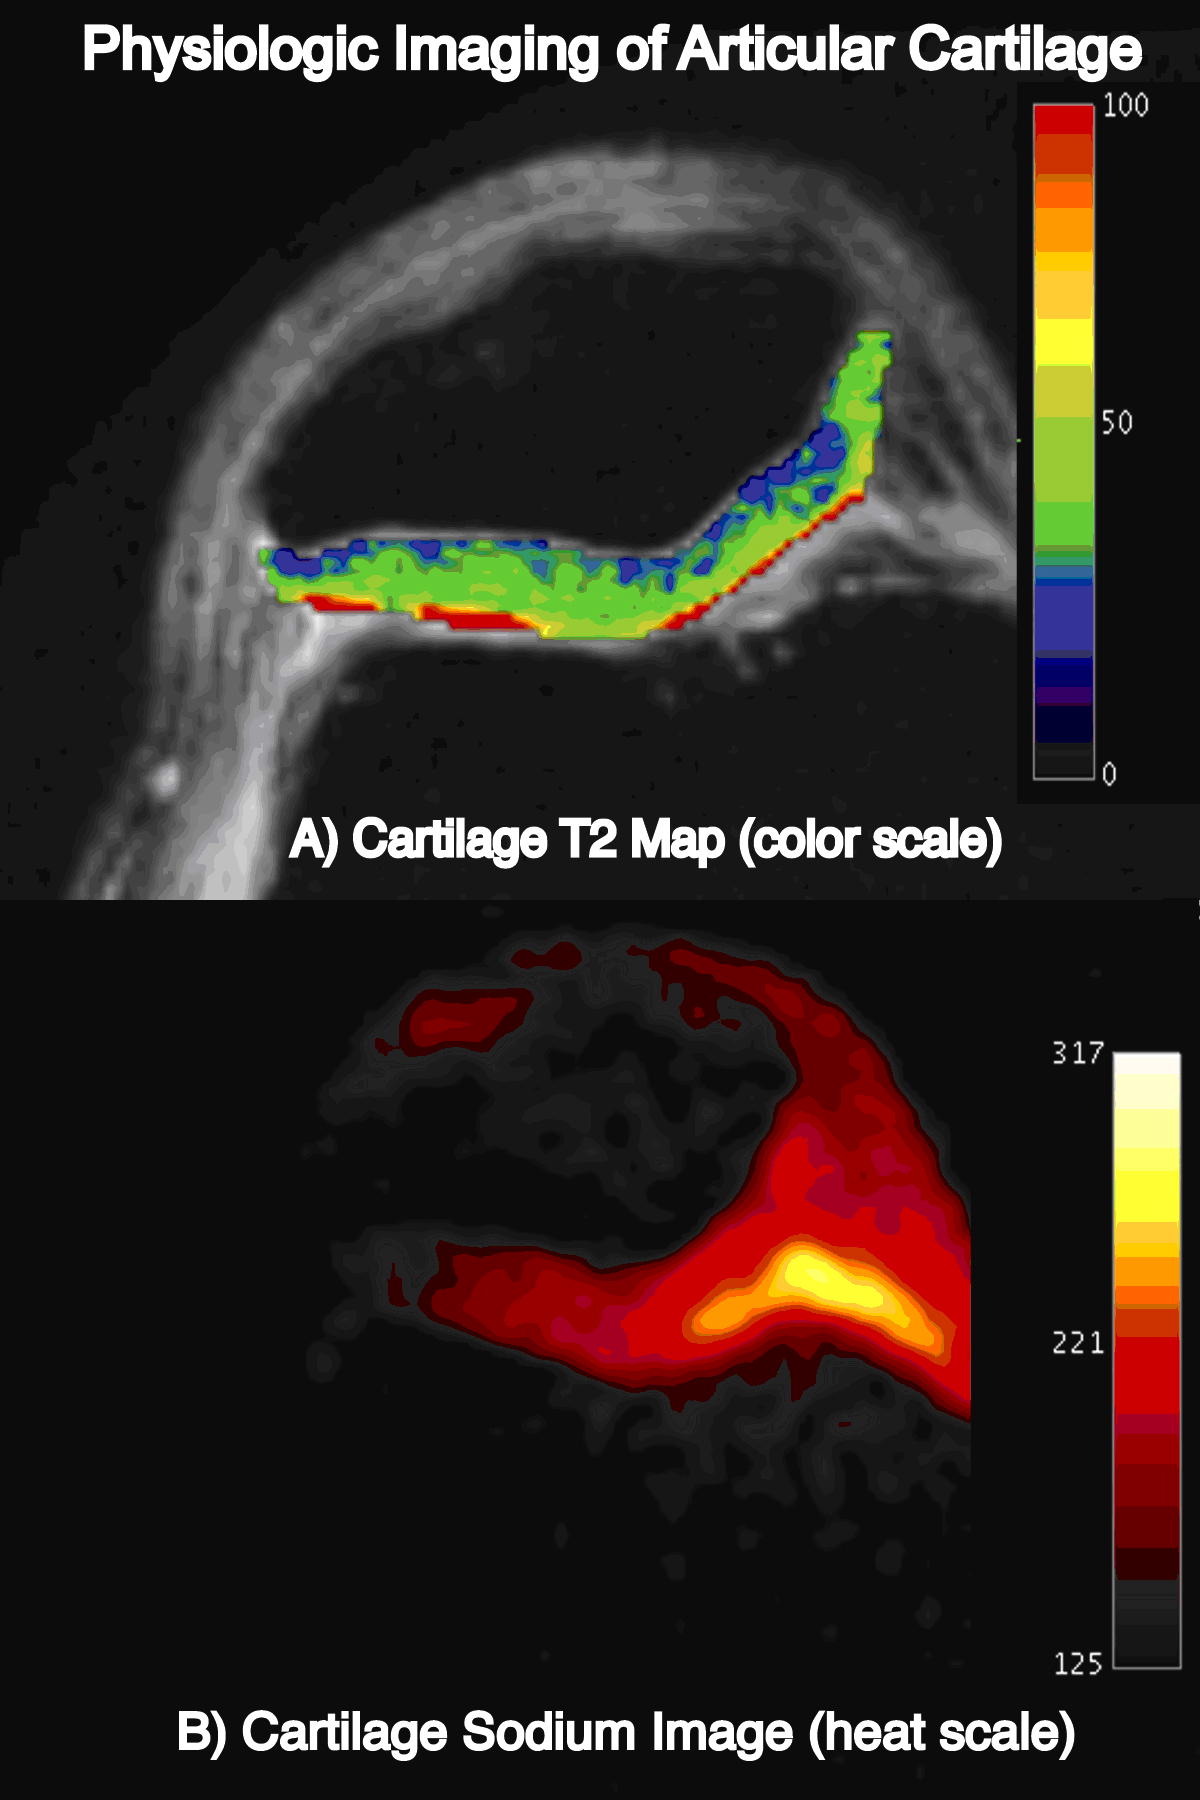 MRI has the capability to provide both structural and physiologic information that is more sensitive to early degenerative changes in cartilage.